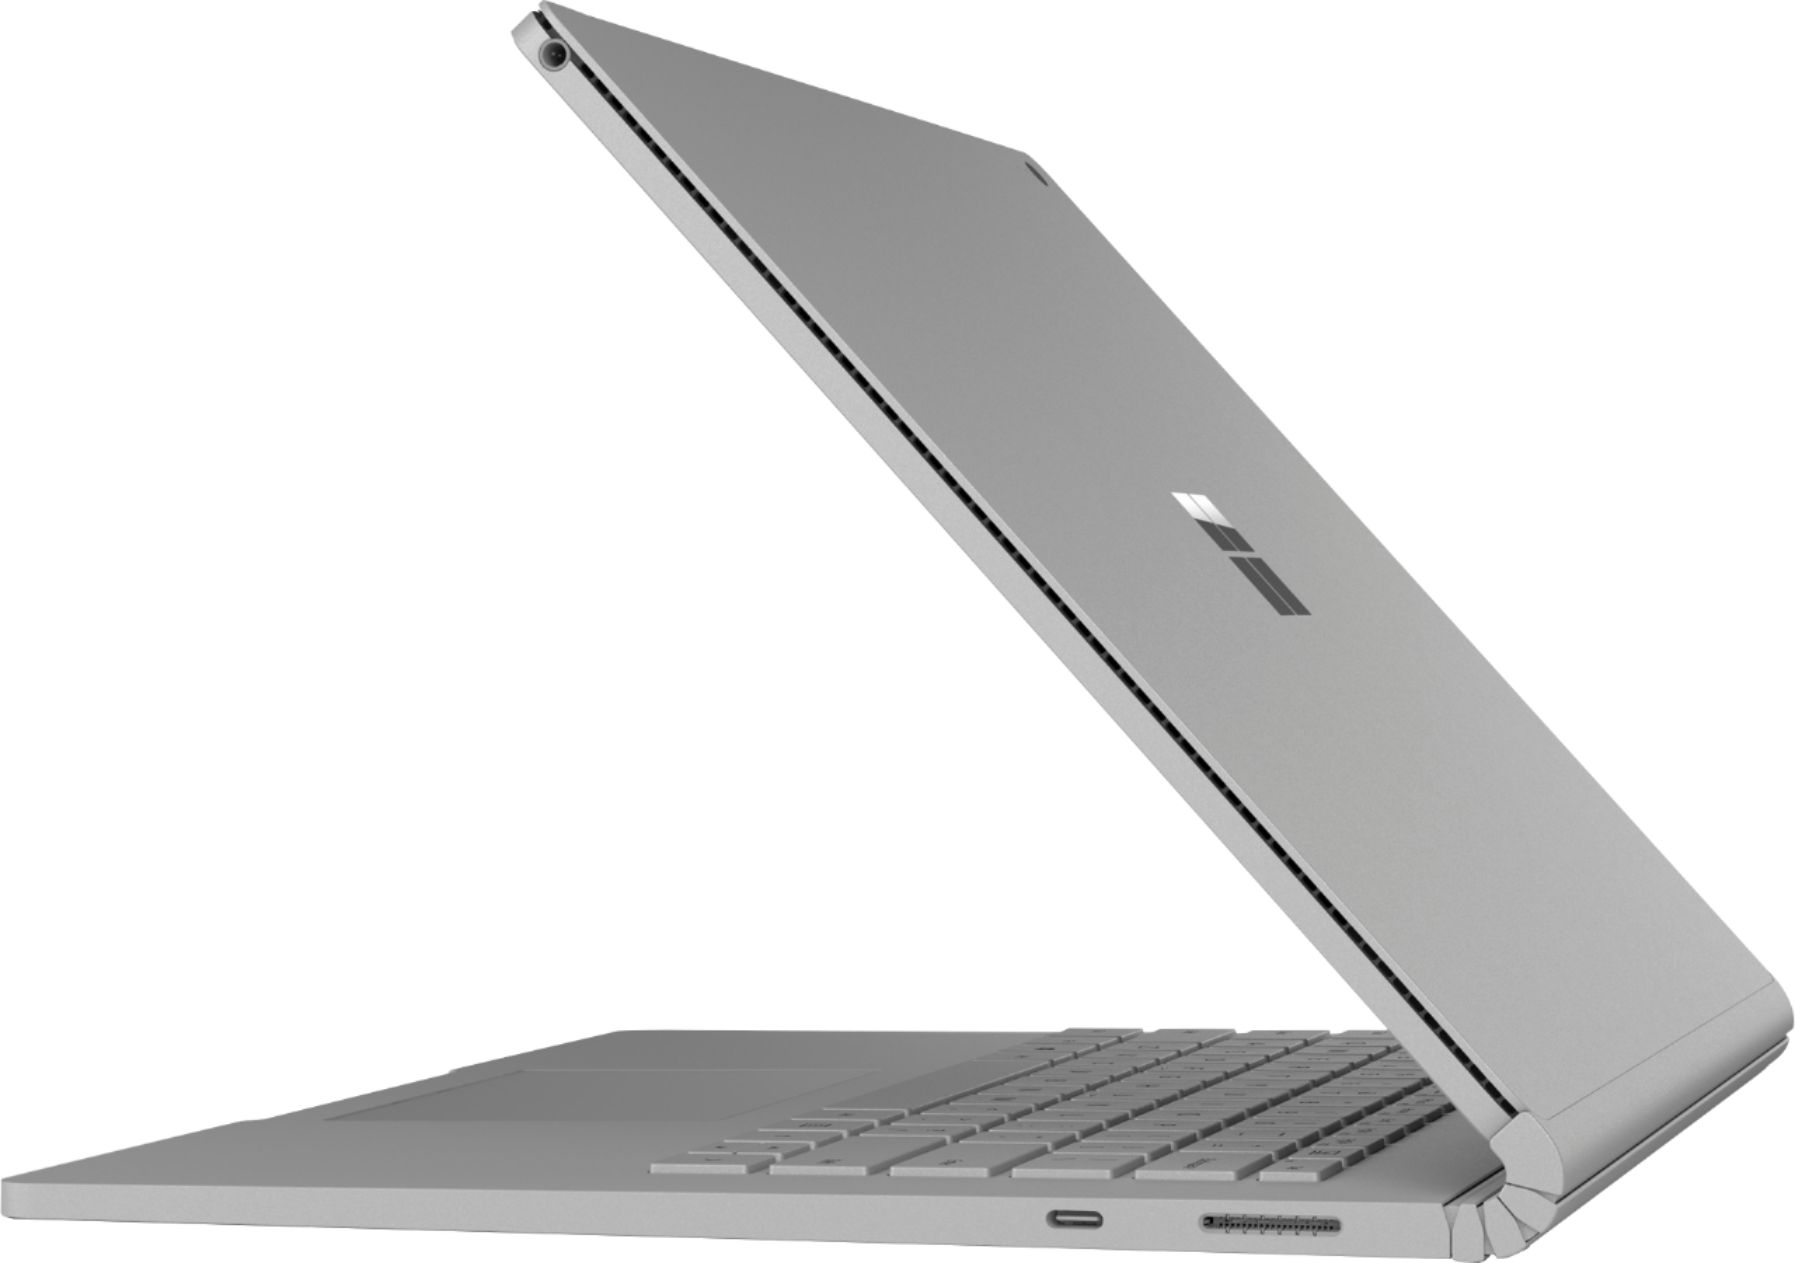 Left View: Microsoft - Geek Squad Certified Refurbished Surface Laptop 4 13.5" Touch-Screen - AMD Ryzen 5 - 8GB Memory - 256GB SSD - Platinum